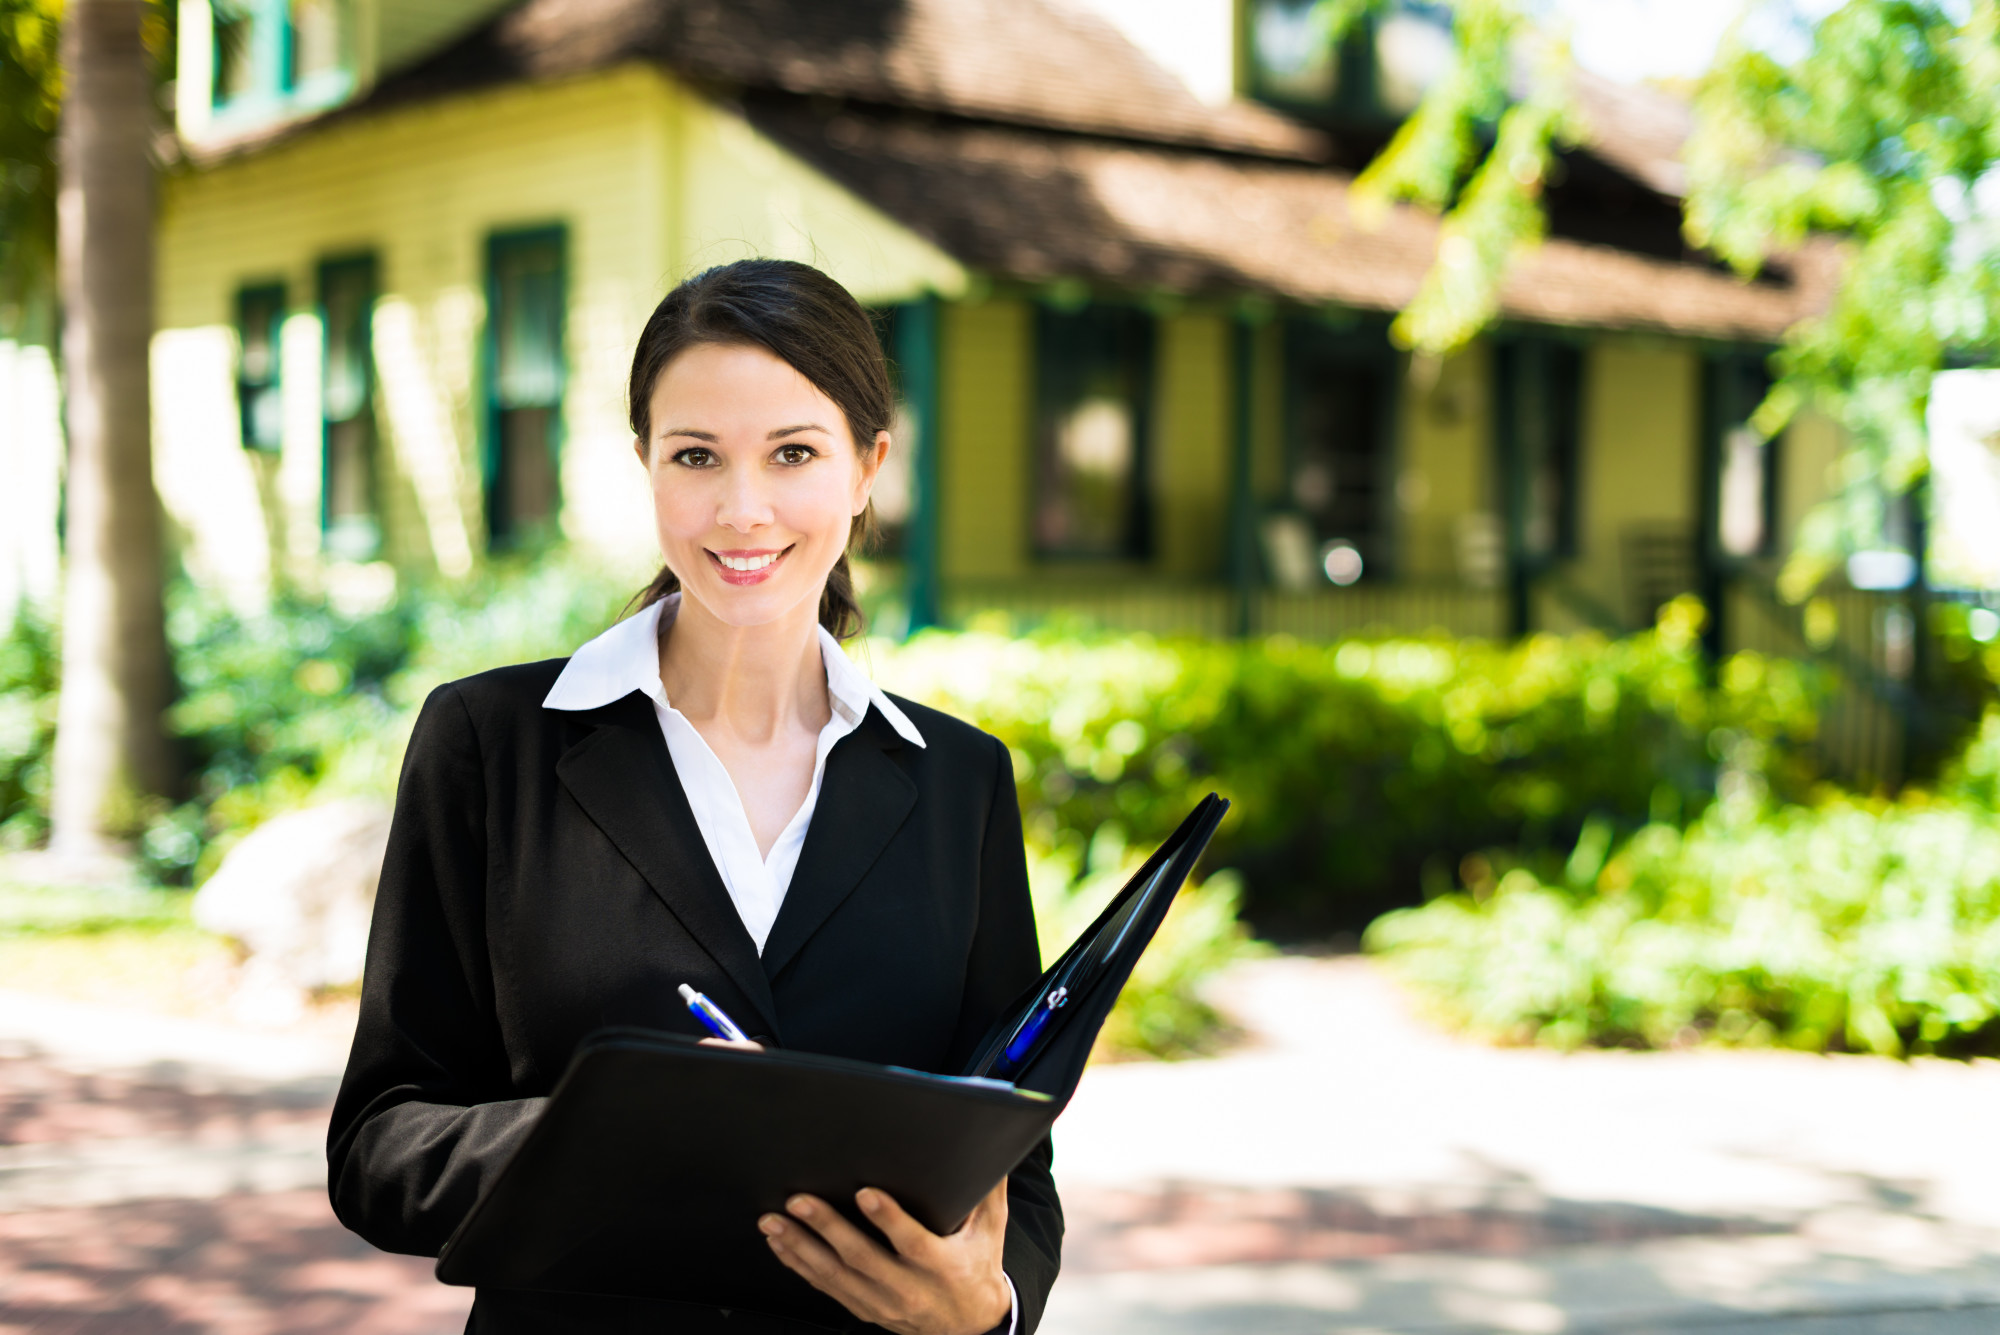 How to Become a Real Estate Agent